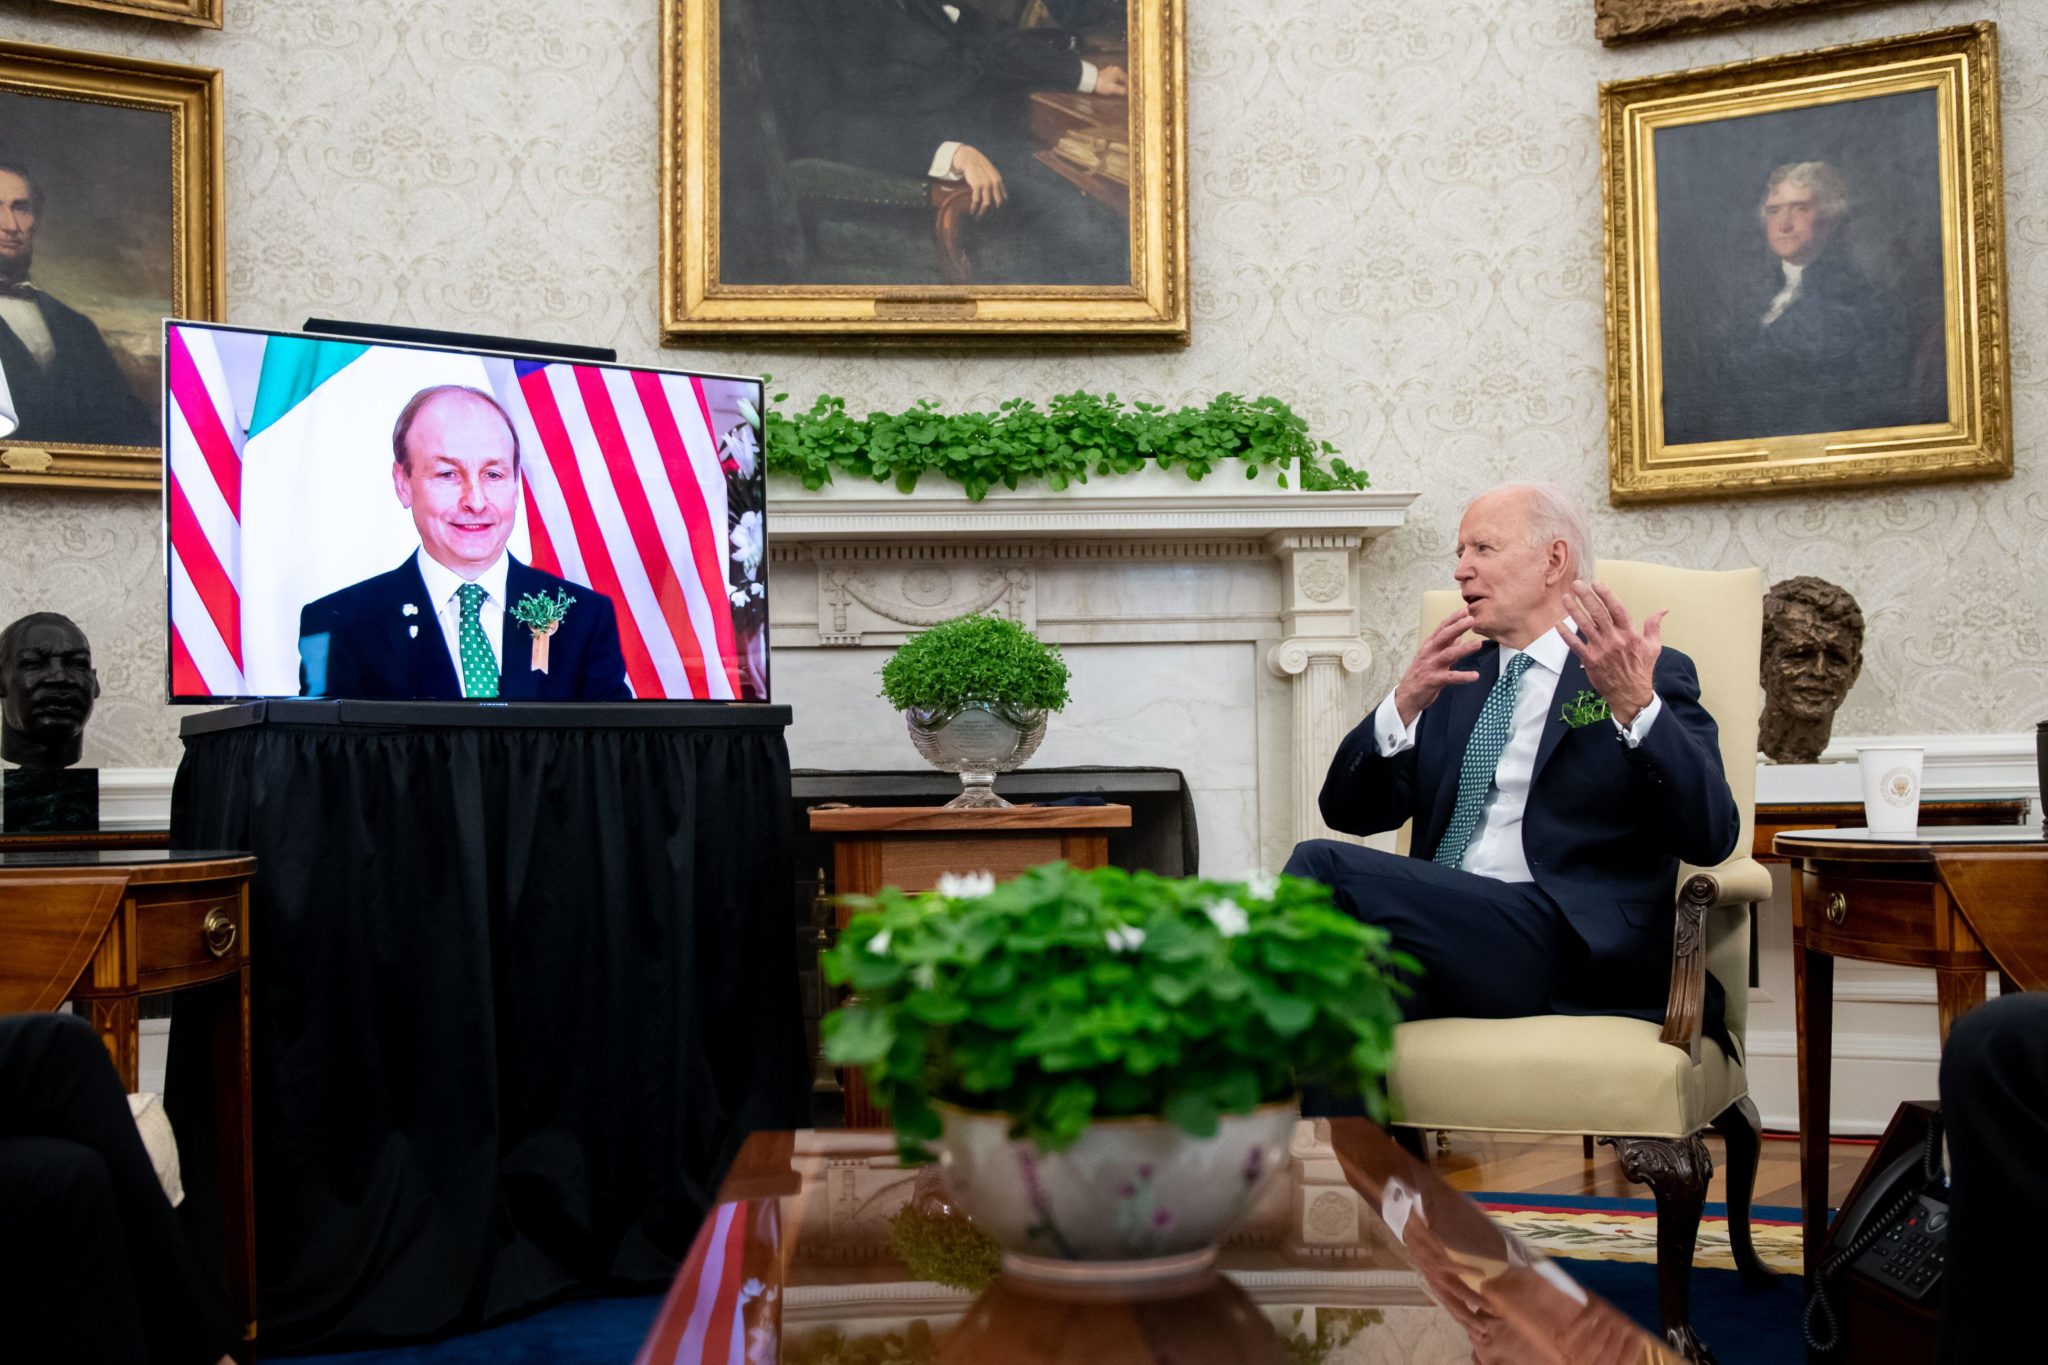 US President Joe Biden participates in a virtual bilateral meeting with Taoiseach Micheál Martin in the Oval Office at the White House in Washington DC in March 2021.